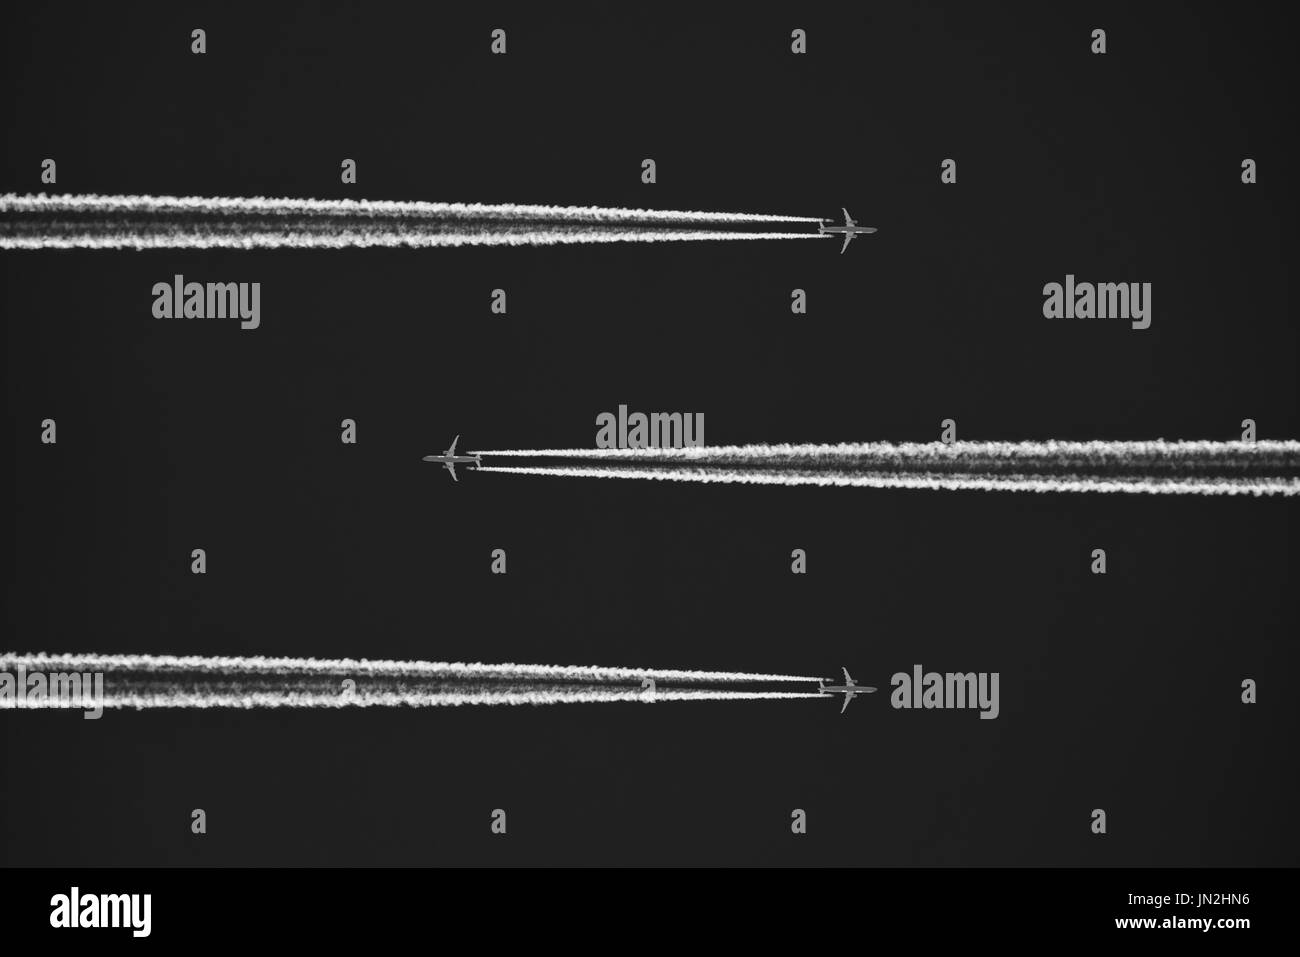 Black and white Image of three aeroplanes / airplanes high in the sky with visible vapor / vapour trails. credit: LEE RAMSDEN / ALAMY Stock Photo